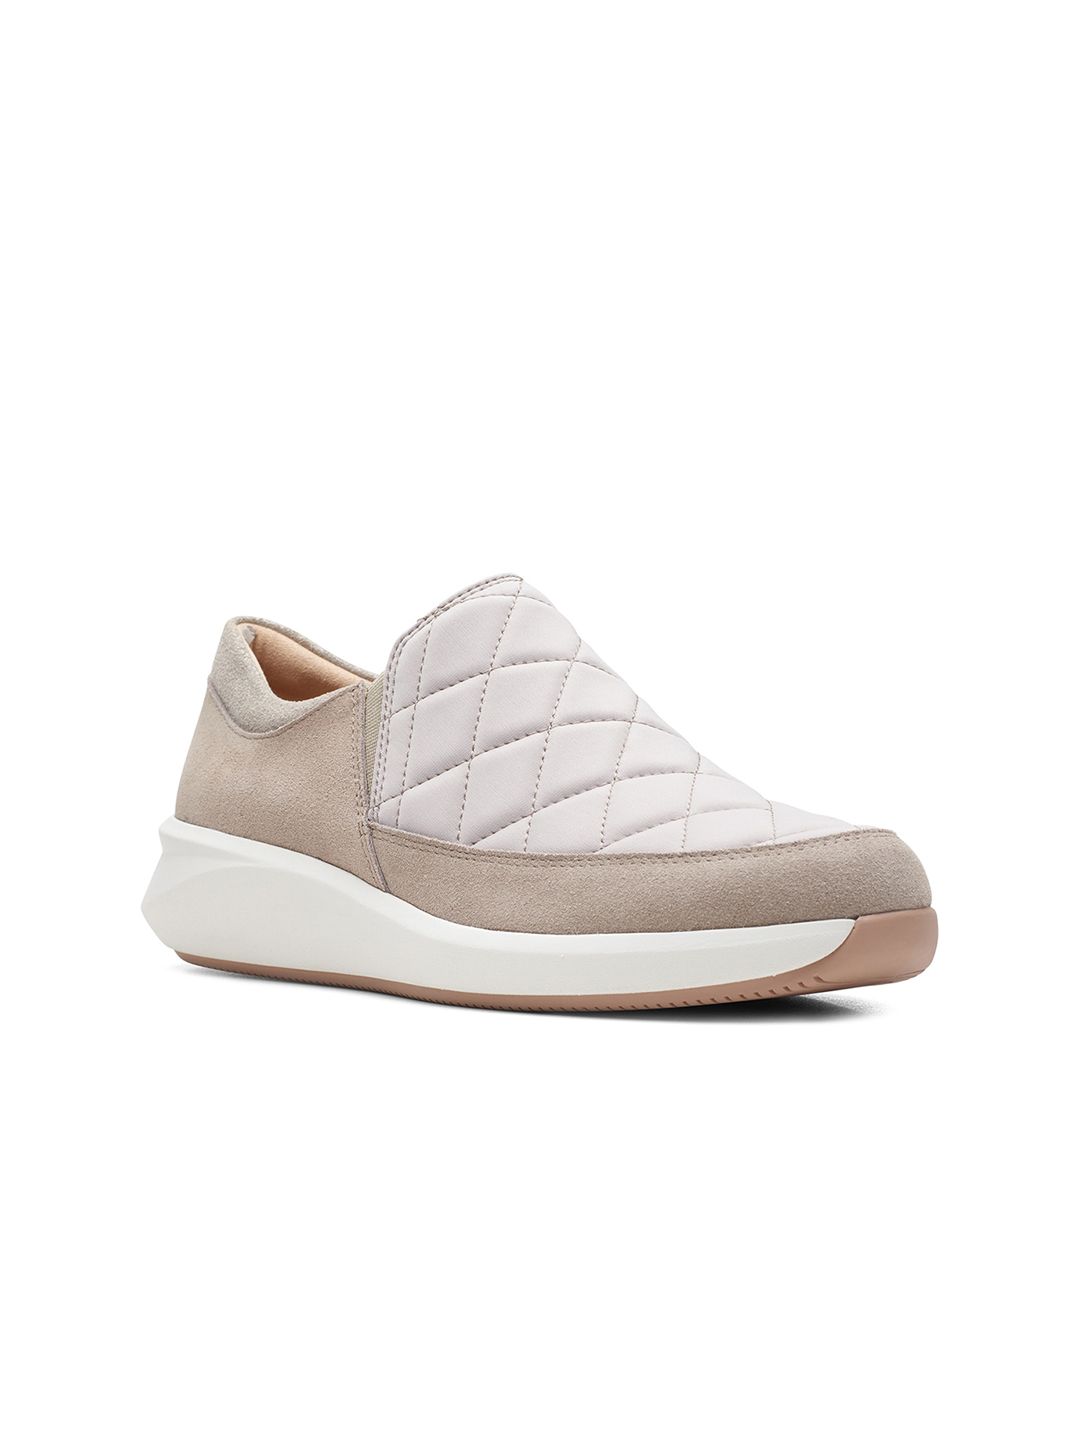 Clarks Women Brown Woven Design Leather Slip-On Sneakers Price in India